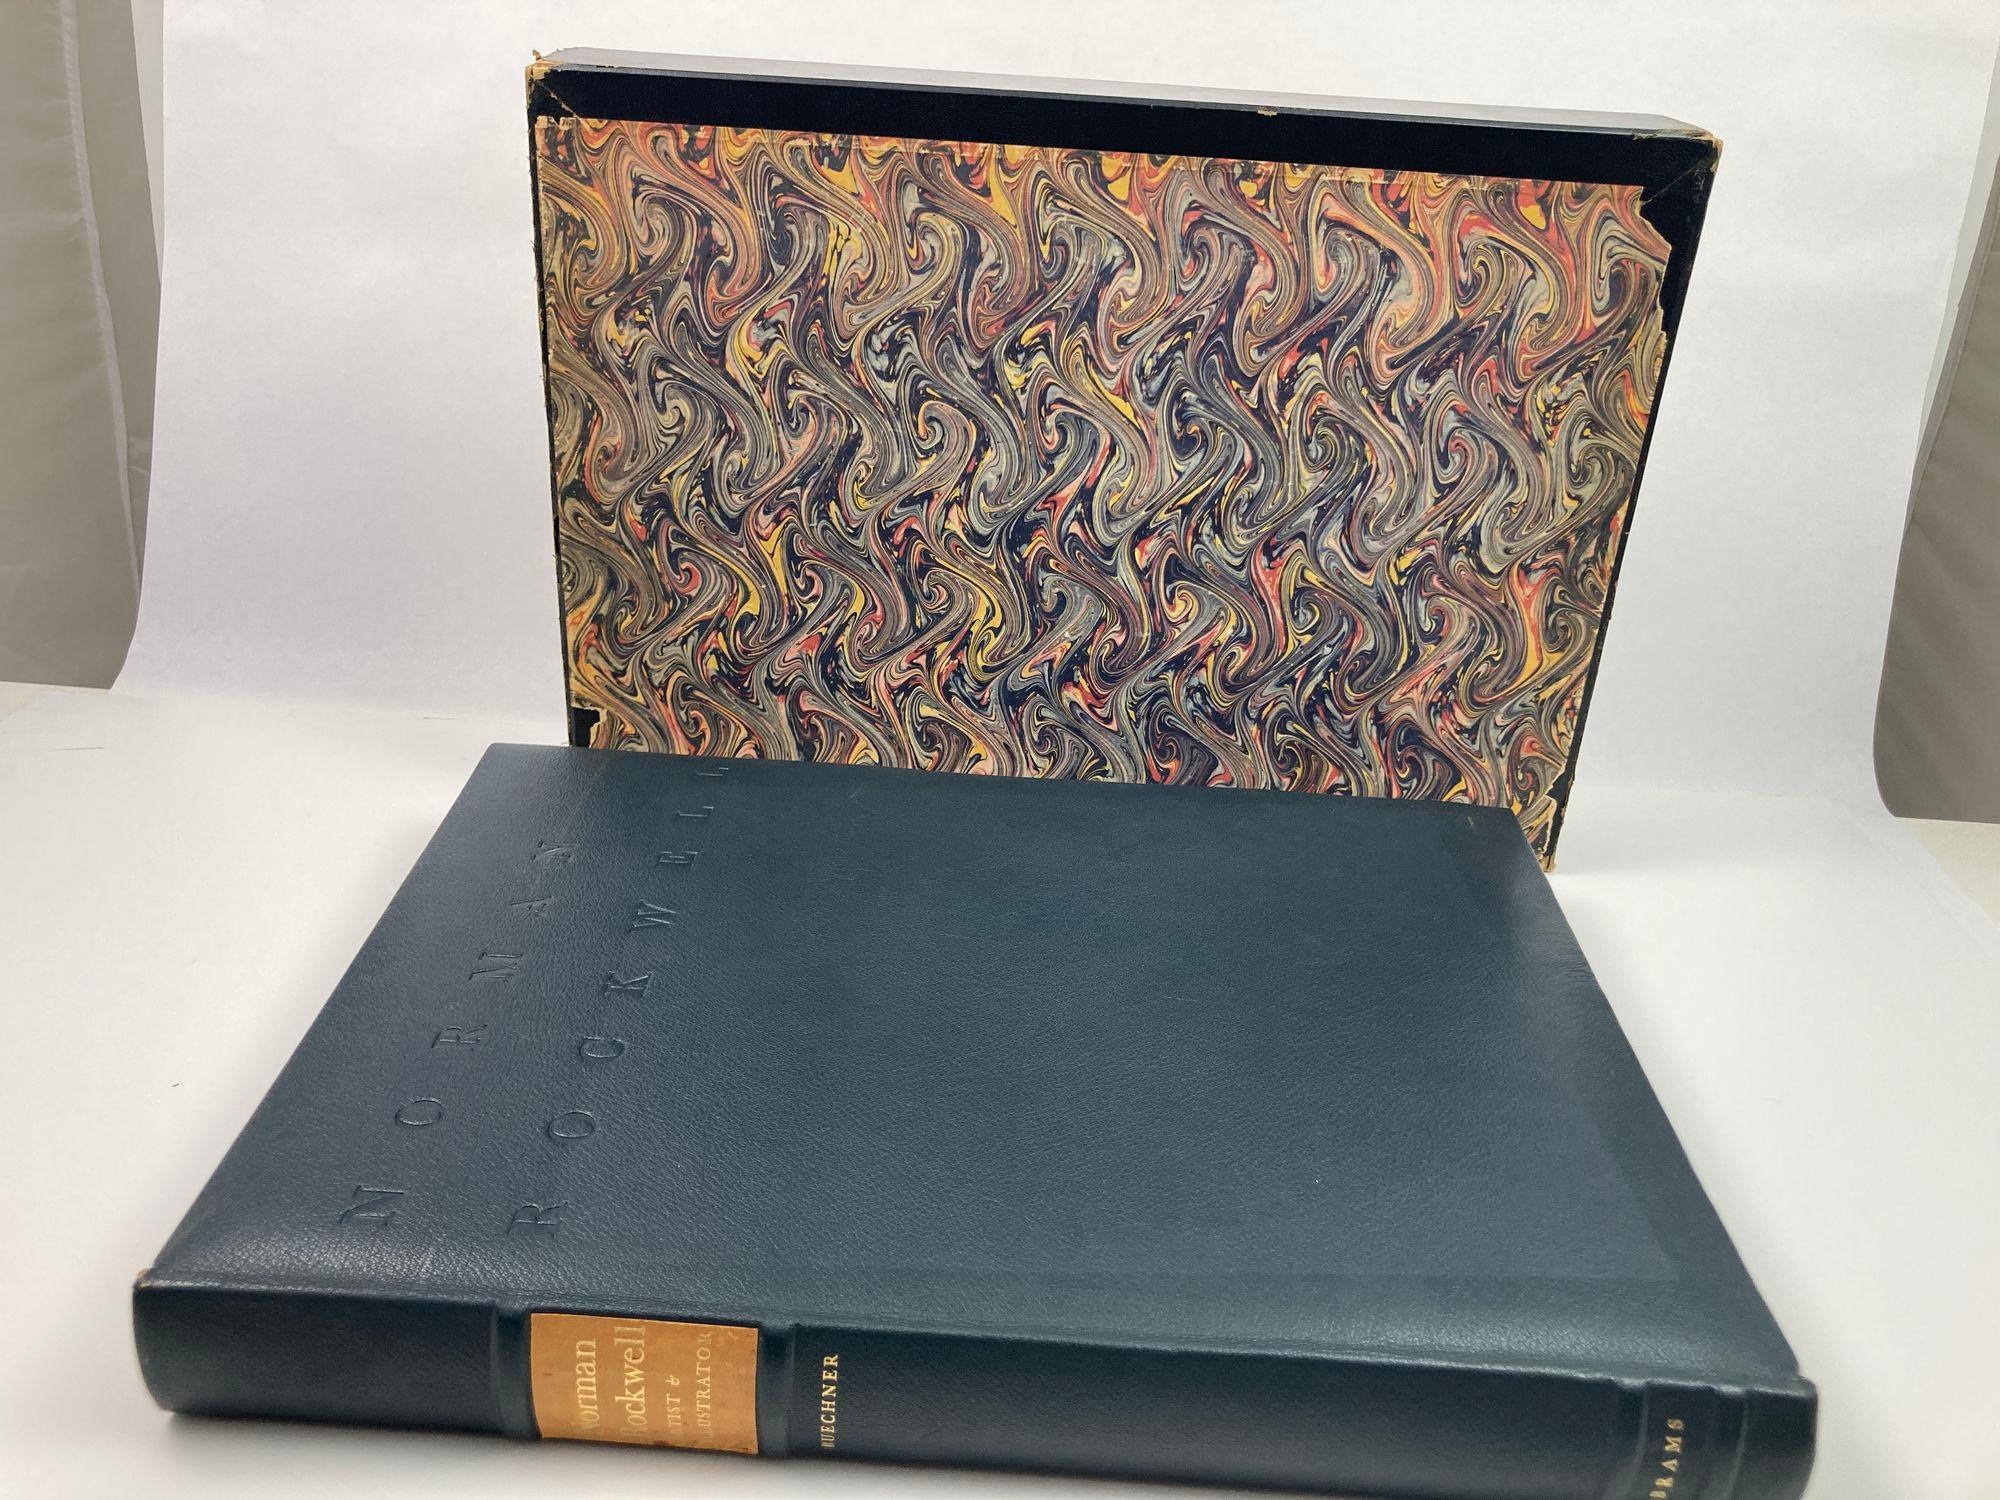 Norman Rockwell: Artist and Illustrator Buechner, Thomas S. Published by Abrams, NY, 1970.
Hardcover. #F/58 of 1000.
Signed by Buechner and Norman Rockwell on the limitation page.
Publisher's full blue leather and marbled paper slipcase.
Large